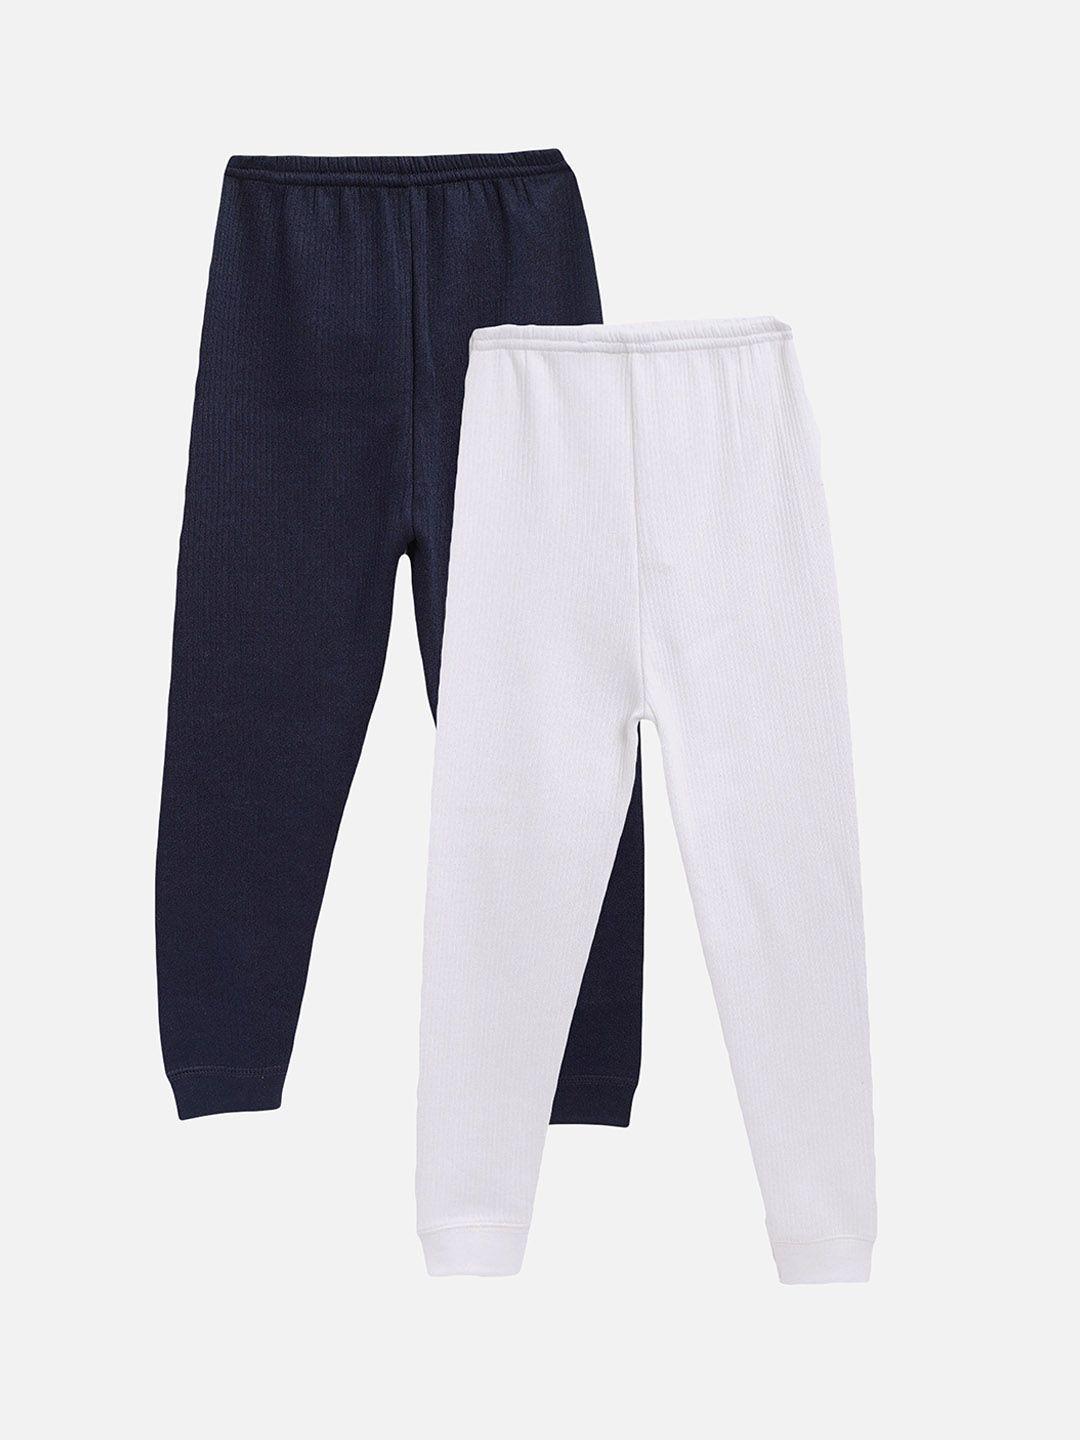 kanvin-pack-of-2-boys-navy-blue-&-white-thermal-bottoms